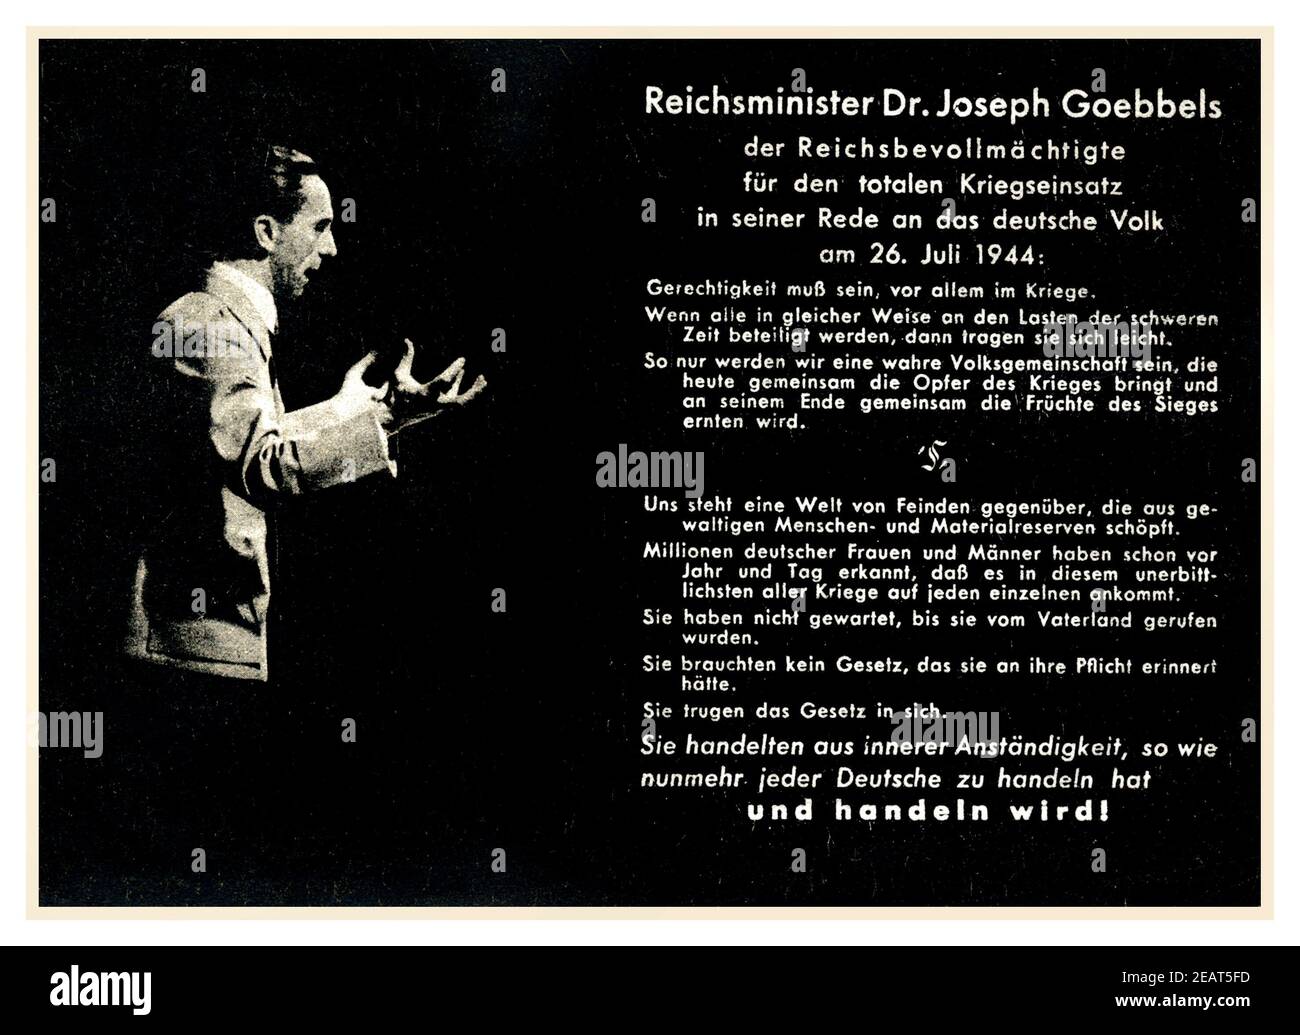 Nazi Propaganda Poster leaflet  'And you? YOU JUST HAVE TO WANT-THEN EVERYTHING GOES!' Reich Minister Dr. Joseph Goebbels, the Reich Plenipotentiary for Total War Deployment, in his speech to the German people on July 26, 1944. Stock Photo